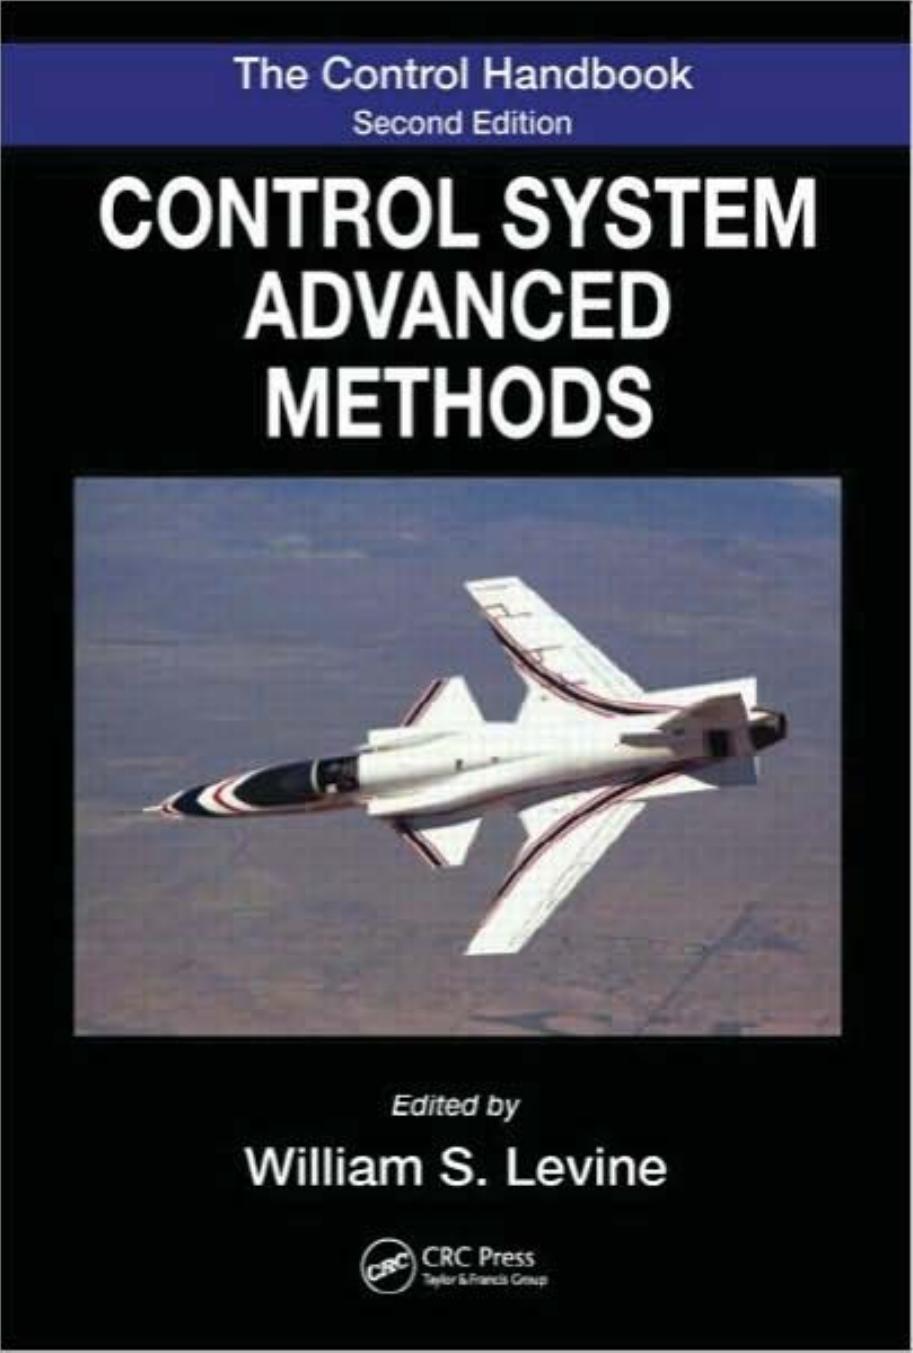 ebooksclub.org  The Control Systems Handbook  Control System Advanced Methods  Second Edition  Electrical Engineering Handbook 2011